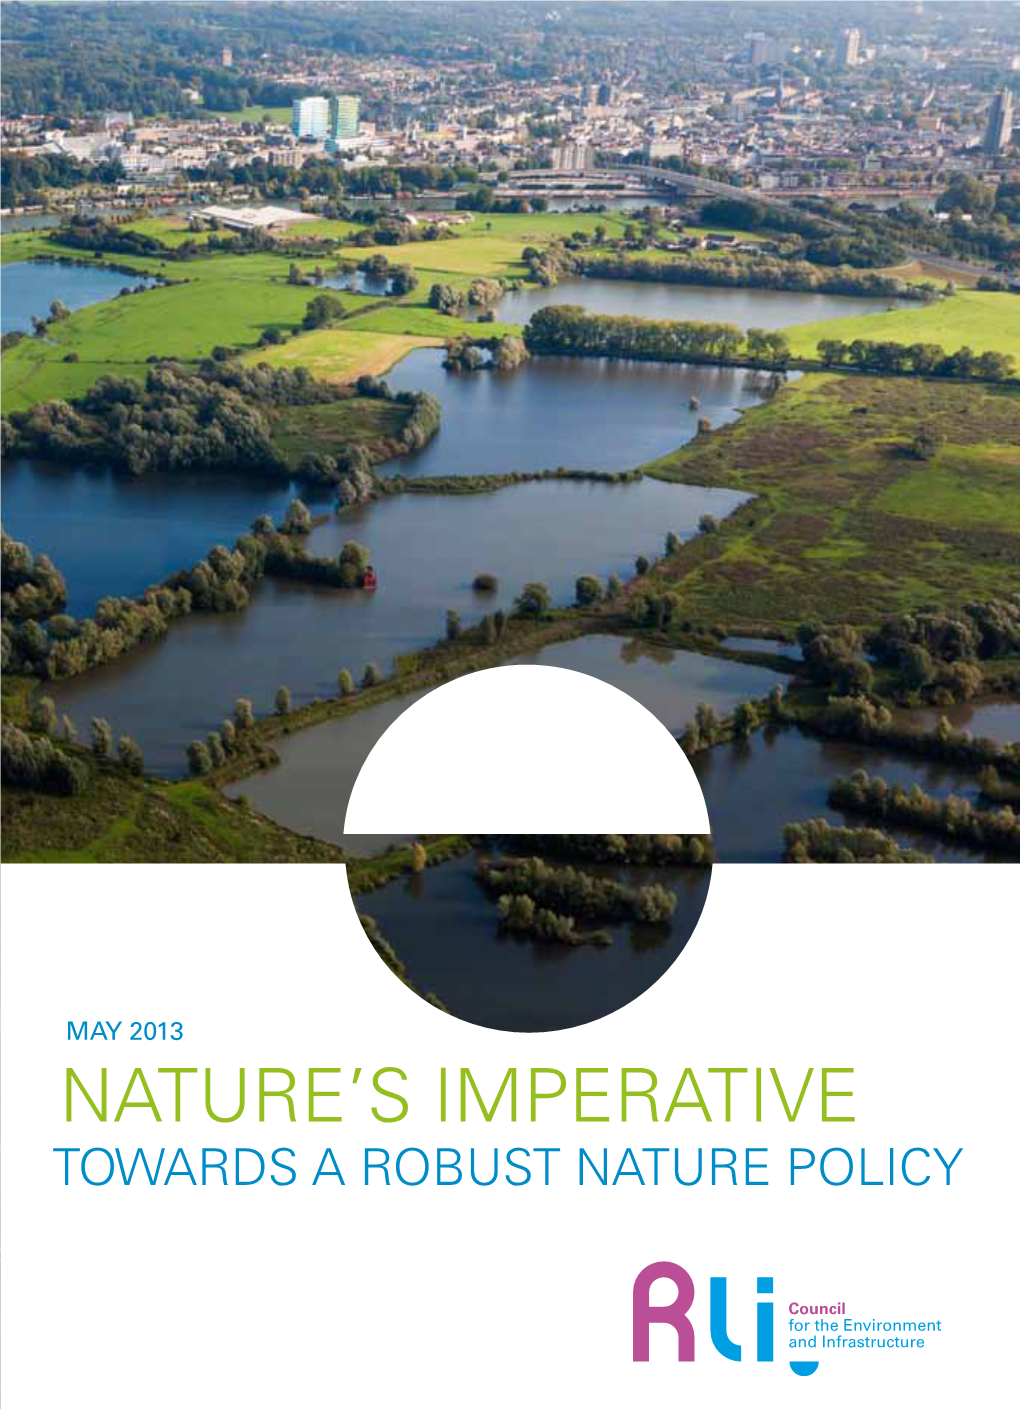 Natures Imperative | Towards a Robust Nature Policy